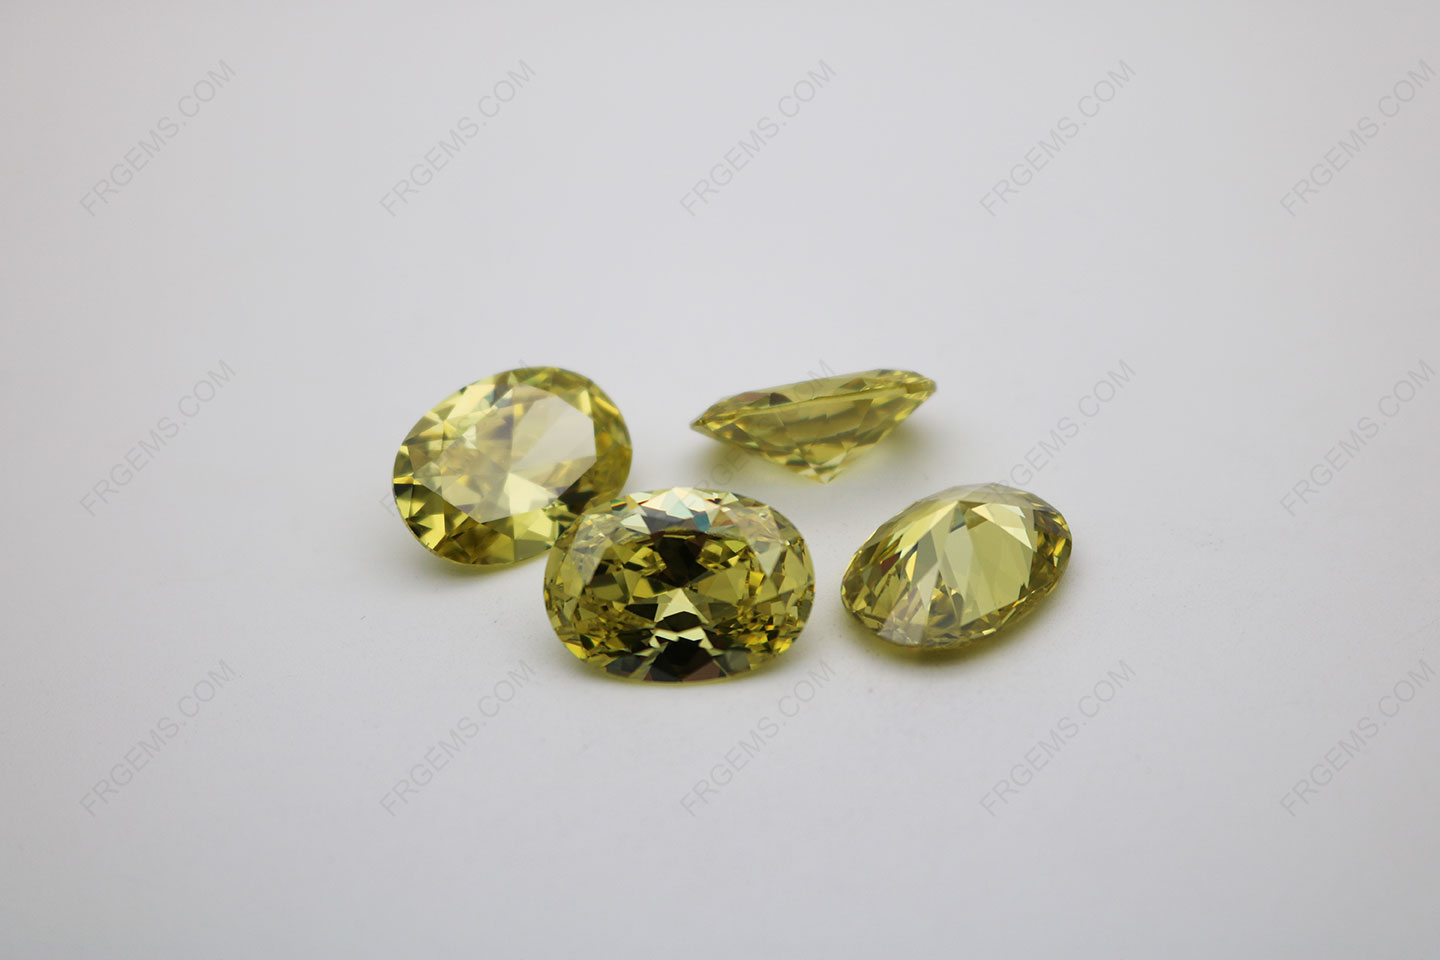 Cubic Zirconia Olive Yellow Oval Shape faceted Cut 12x8mm stones CZ25 IMG_1218